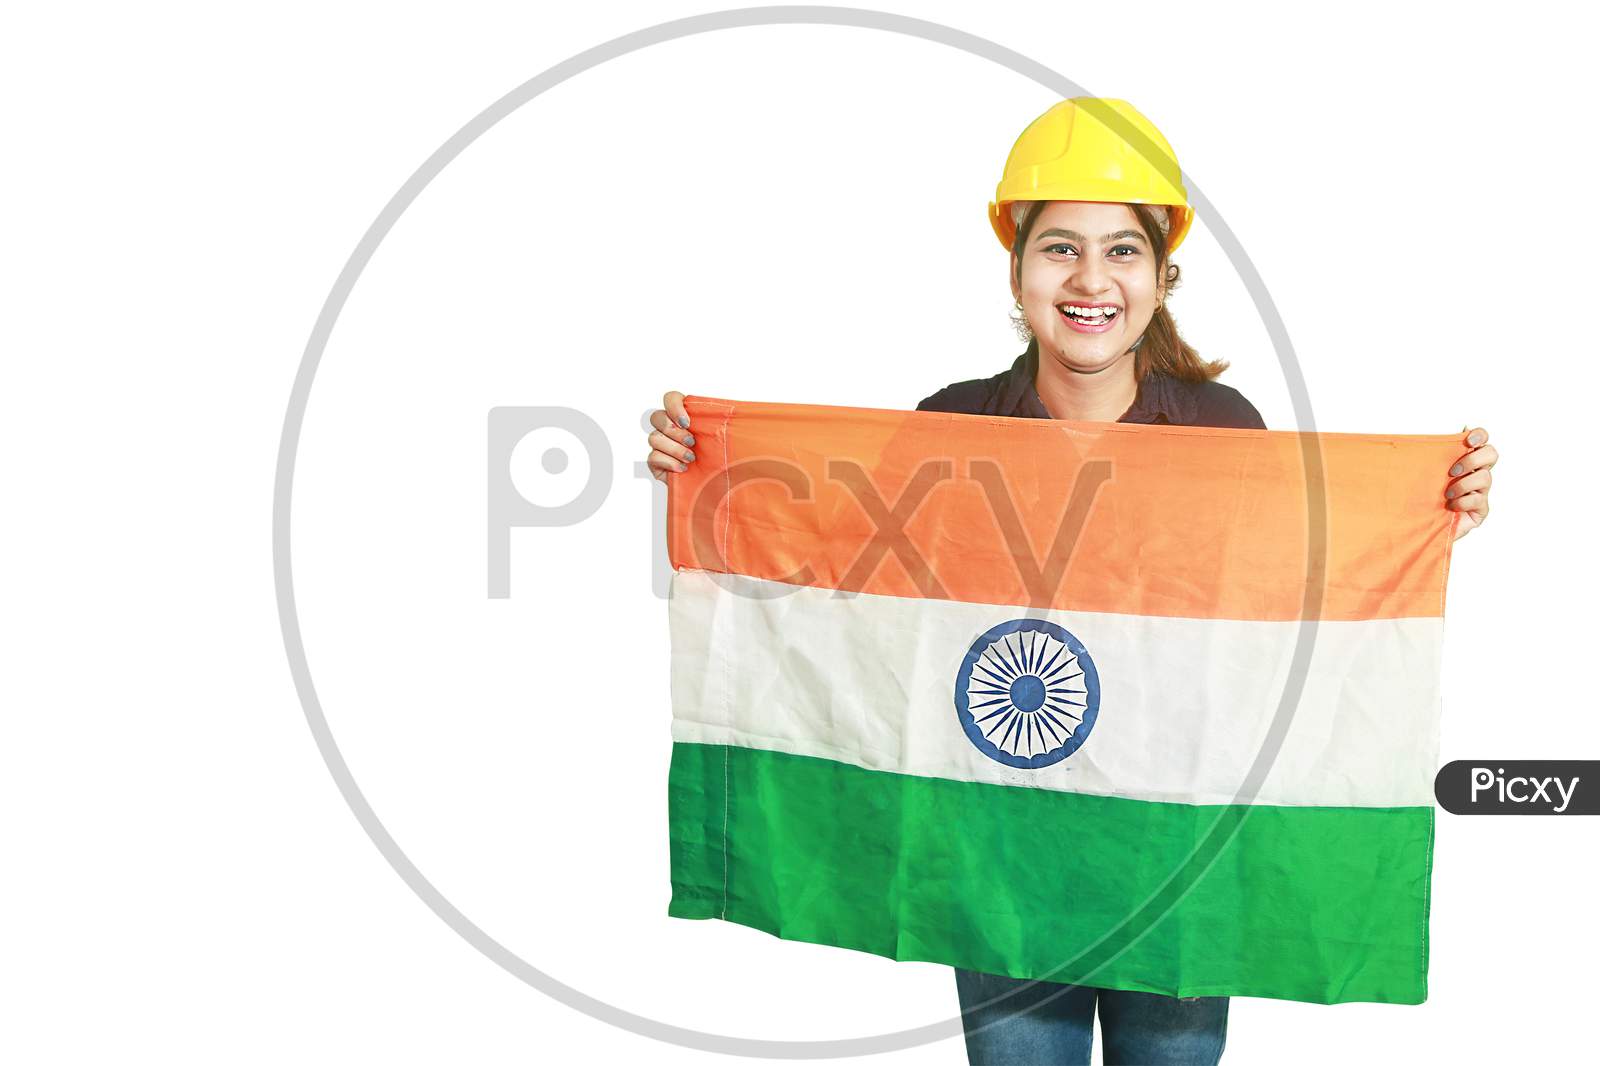 Young Indian Millennial Female Engineer Holding Indian Tricolor Flag With Smile And Showing Patriotism, Republic Day Or Independence Day Concept Isolated On White Background Copy Space To Write Text.